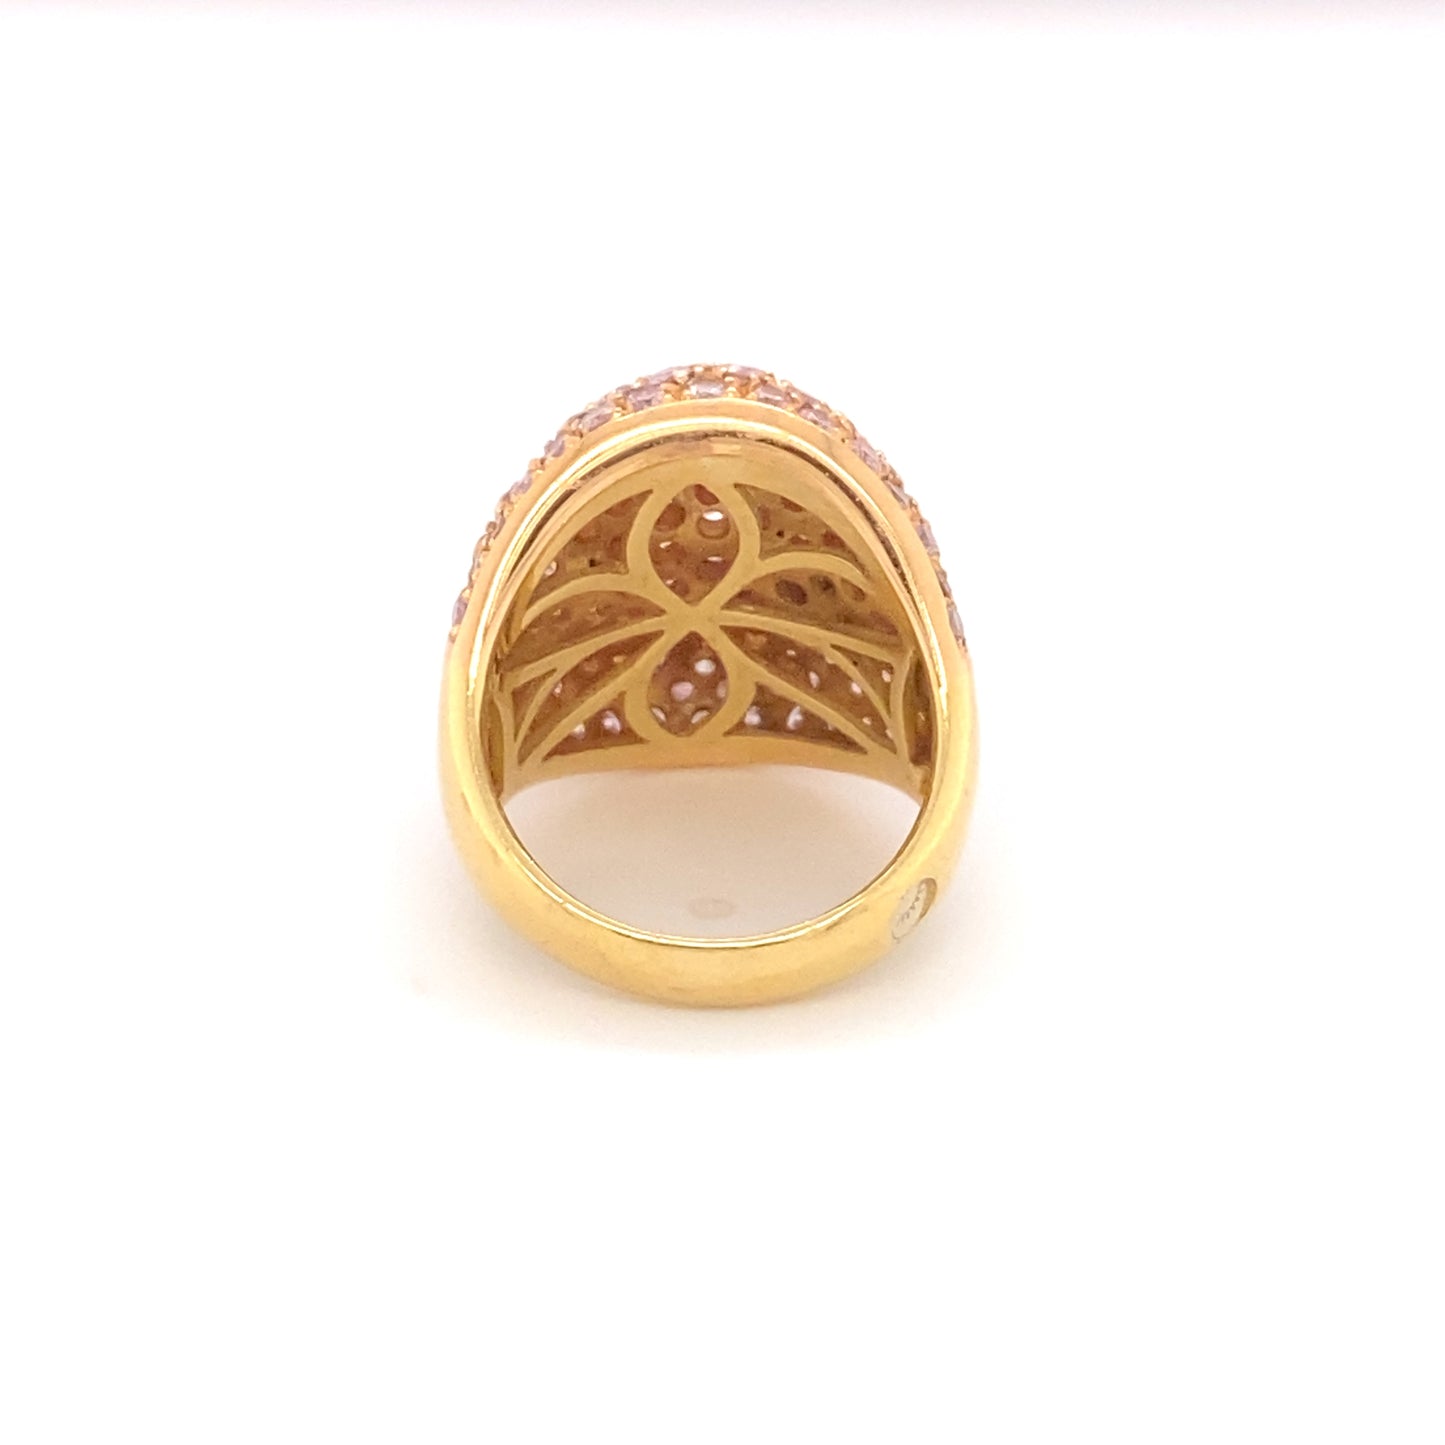 4.0 Carat Pink Diamond Concave Band in 18K Gold